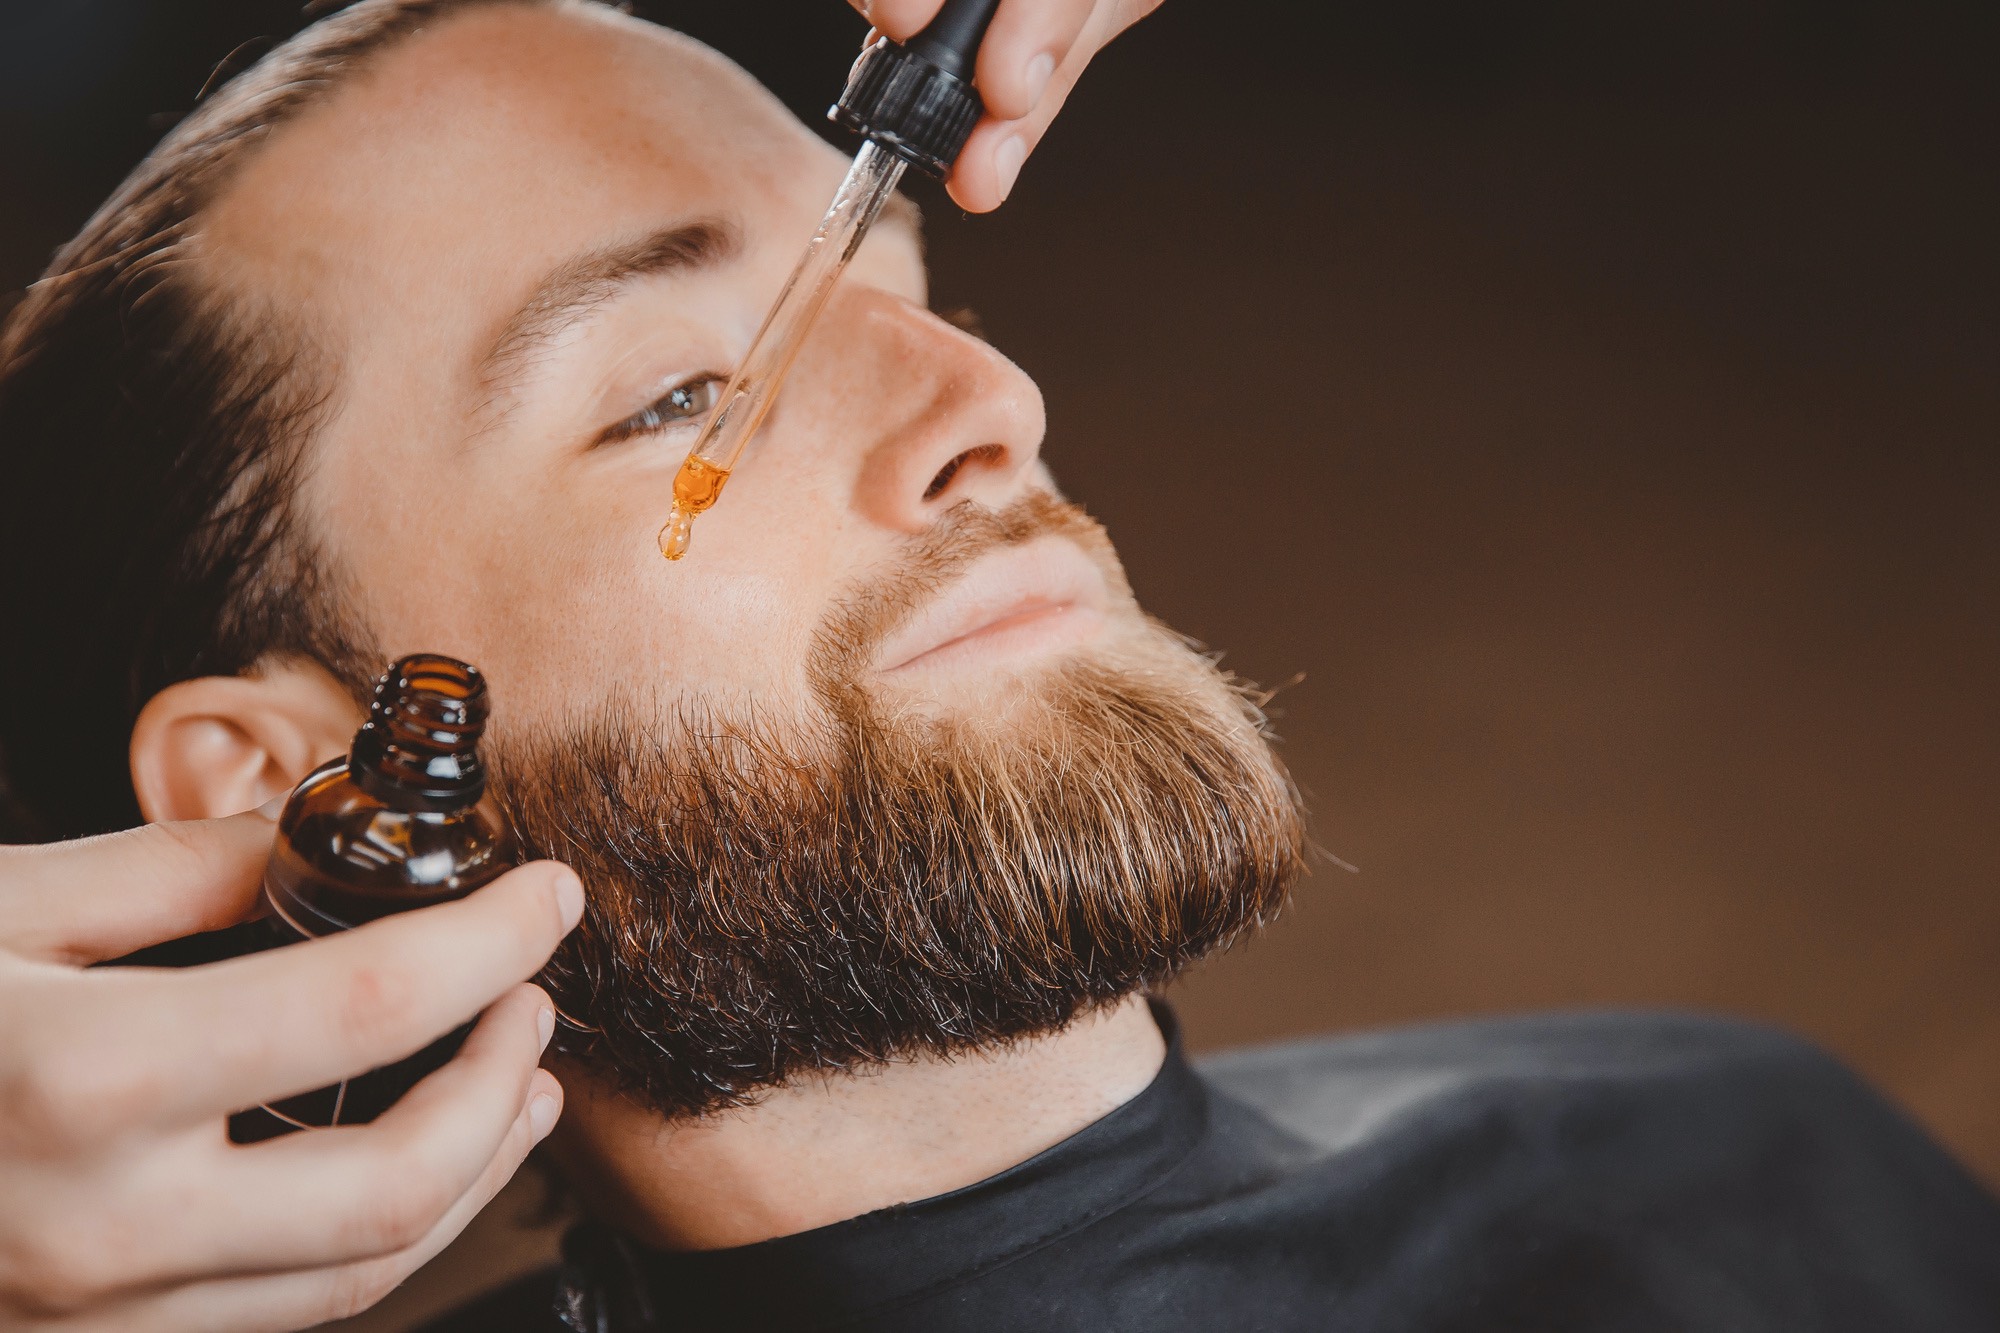 5 Things to Look for When You Buy Beard Oil